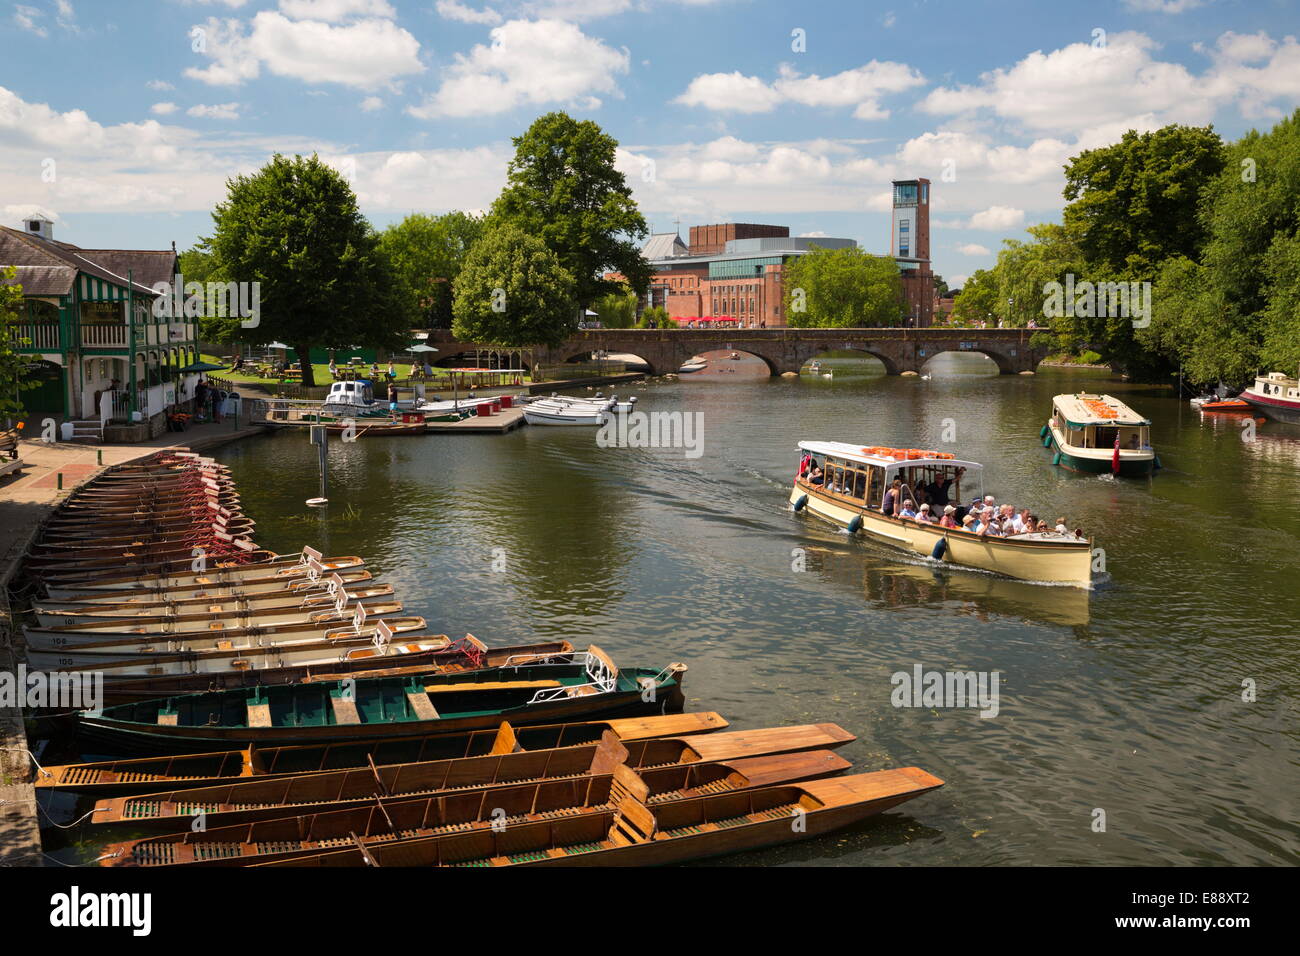 Boats on the River Avon and the Royal Shakespeare Theatre, Stratford-upon-Avon, Warwickshire, England, United Kingdom, Europe Stock Photo